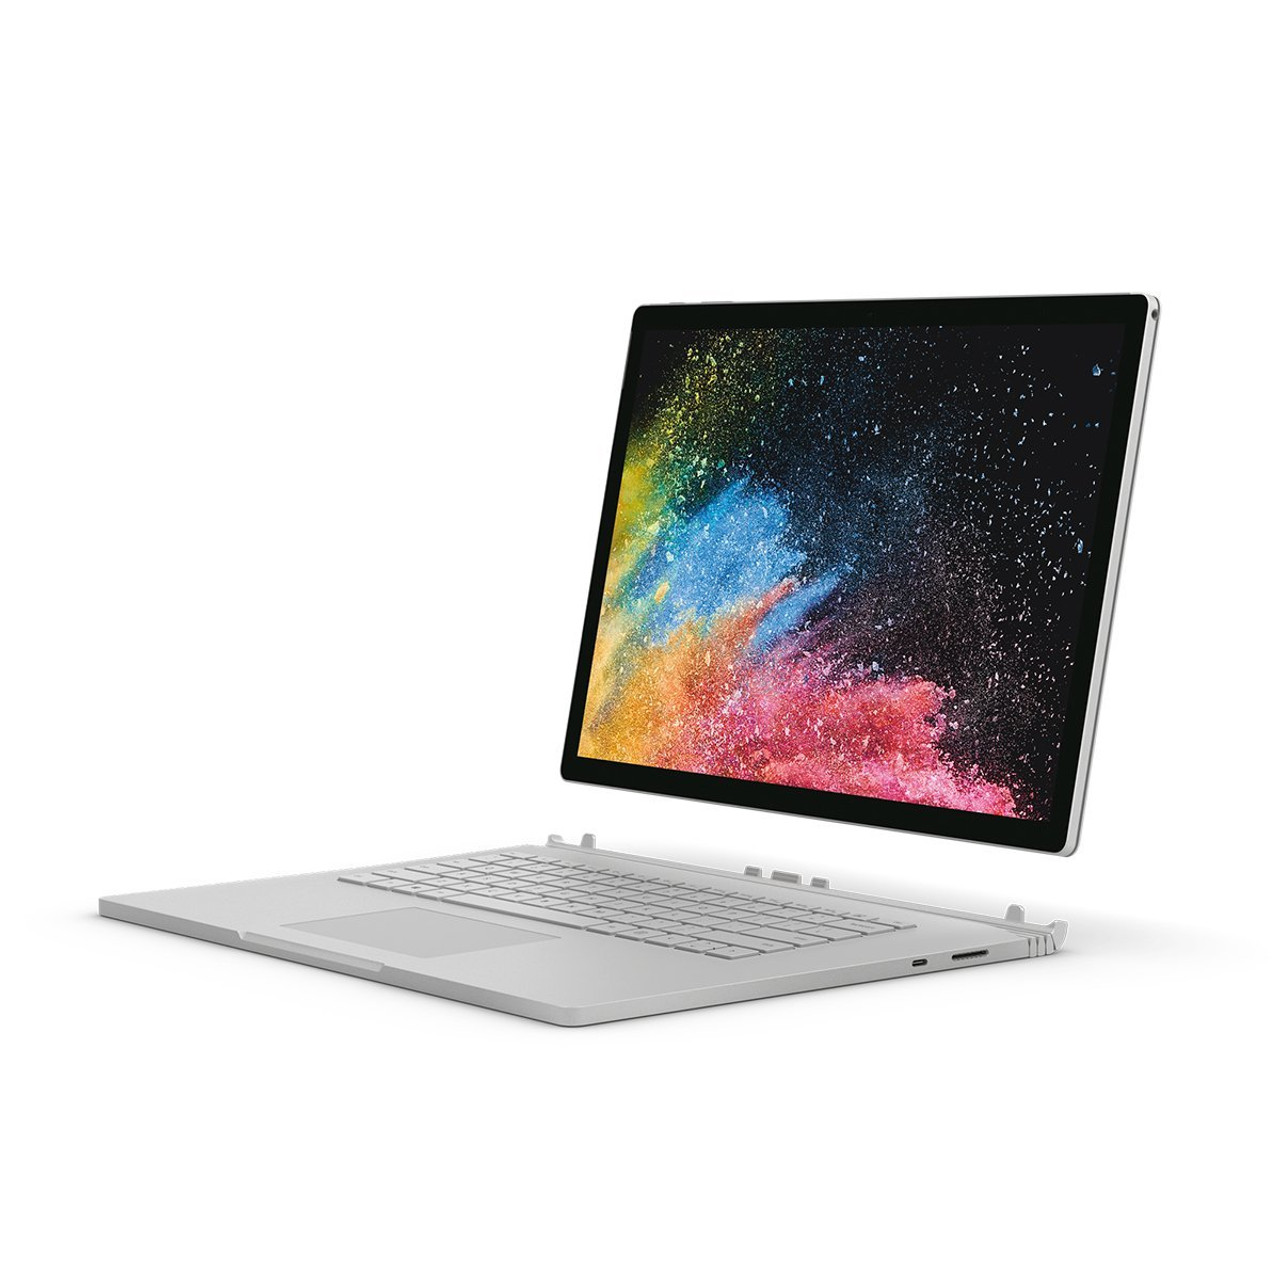 Microsoft Surface Book 2 FVG-00001 15 Touchscreen LCD 2 in 1 Notebook -  Intel Core i7-8650U Quad-core (4 Core) 1.90 GHz - 16 GB LPDDR3 - 512GB SSD  - ...